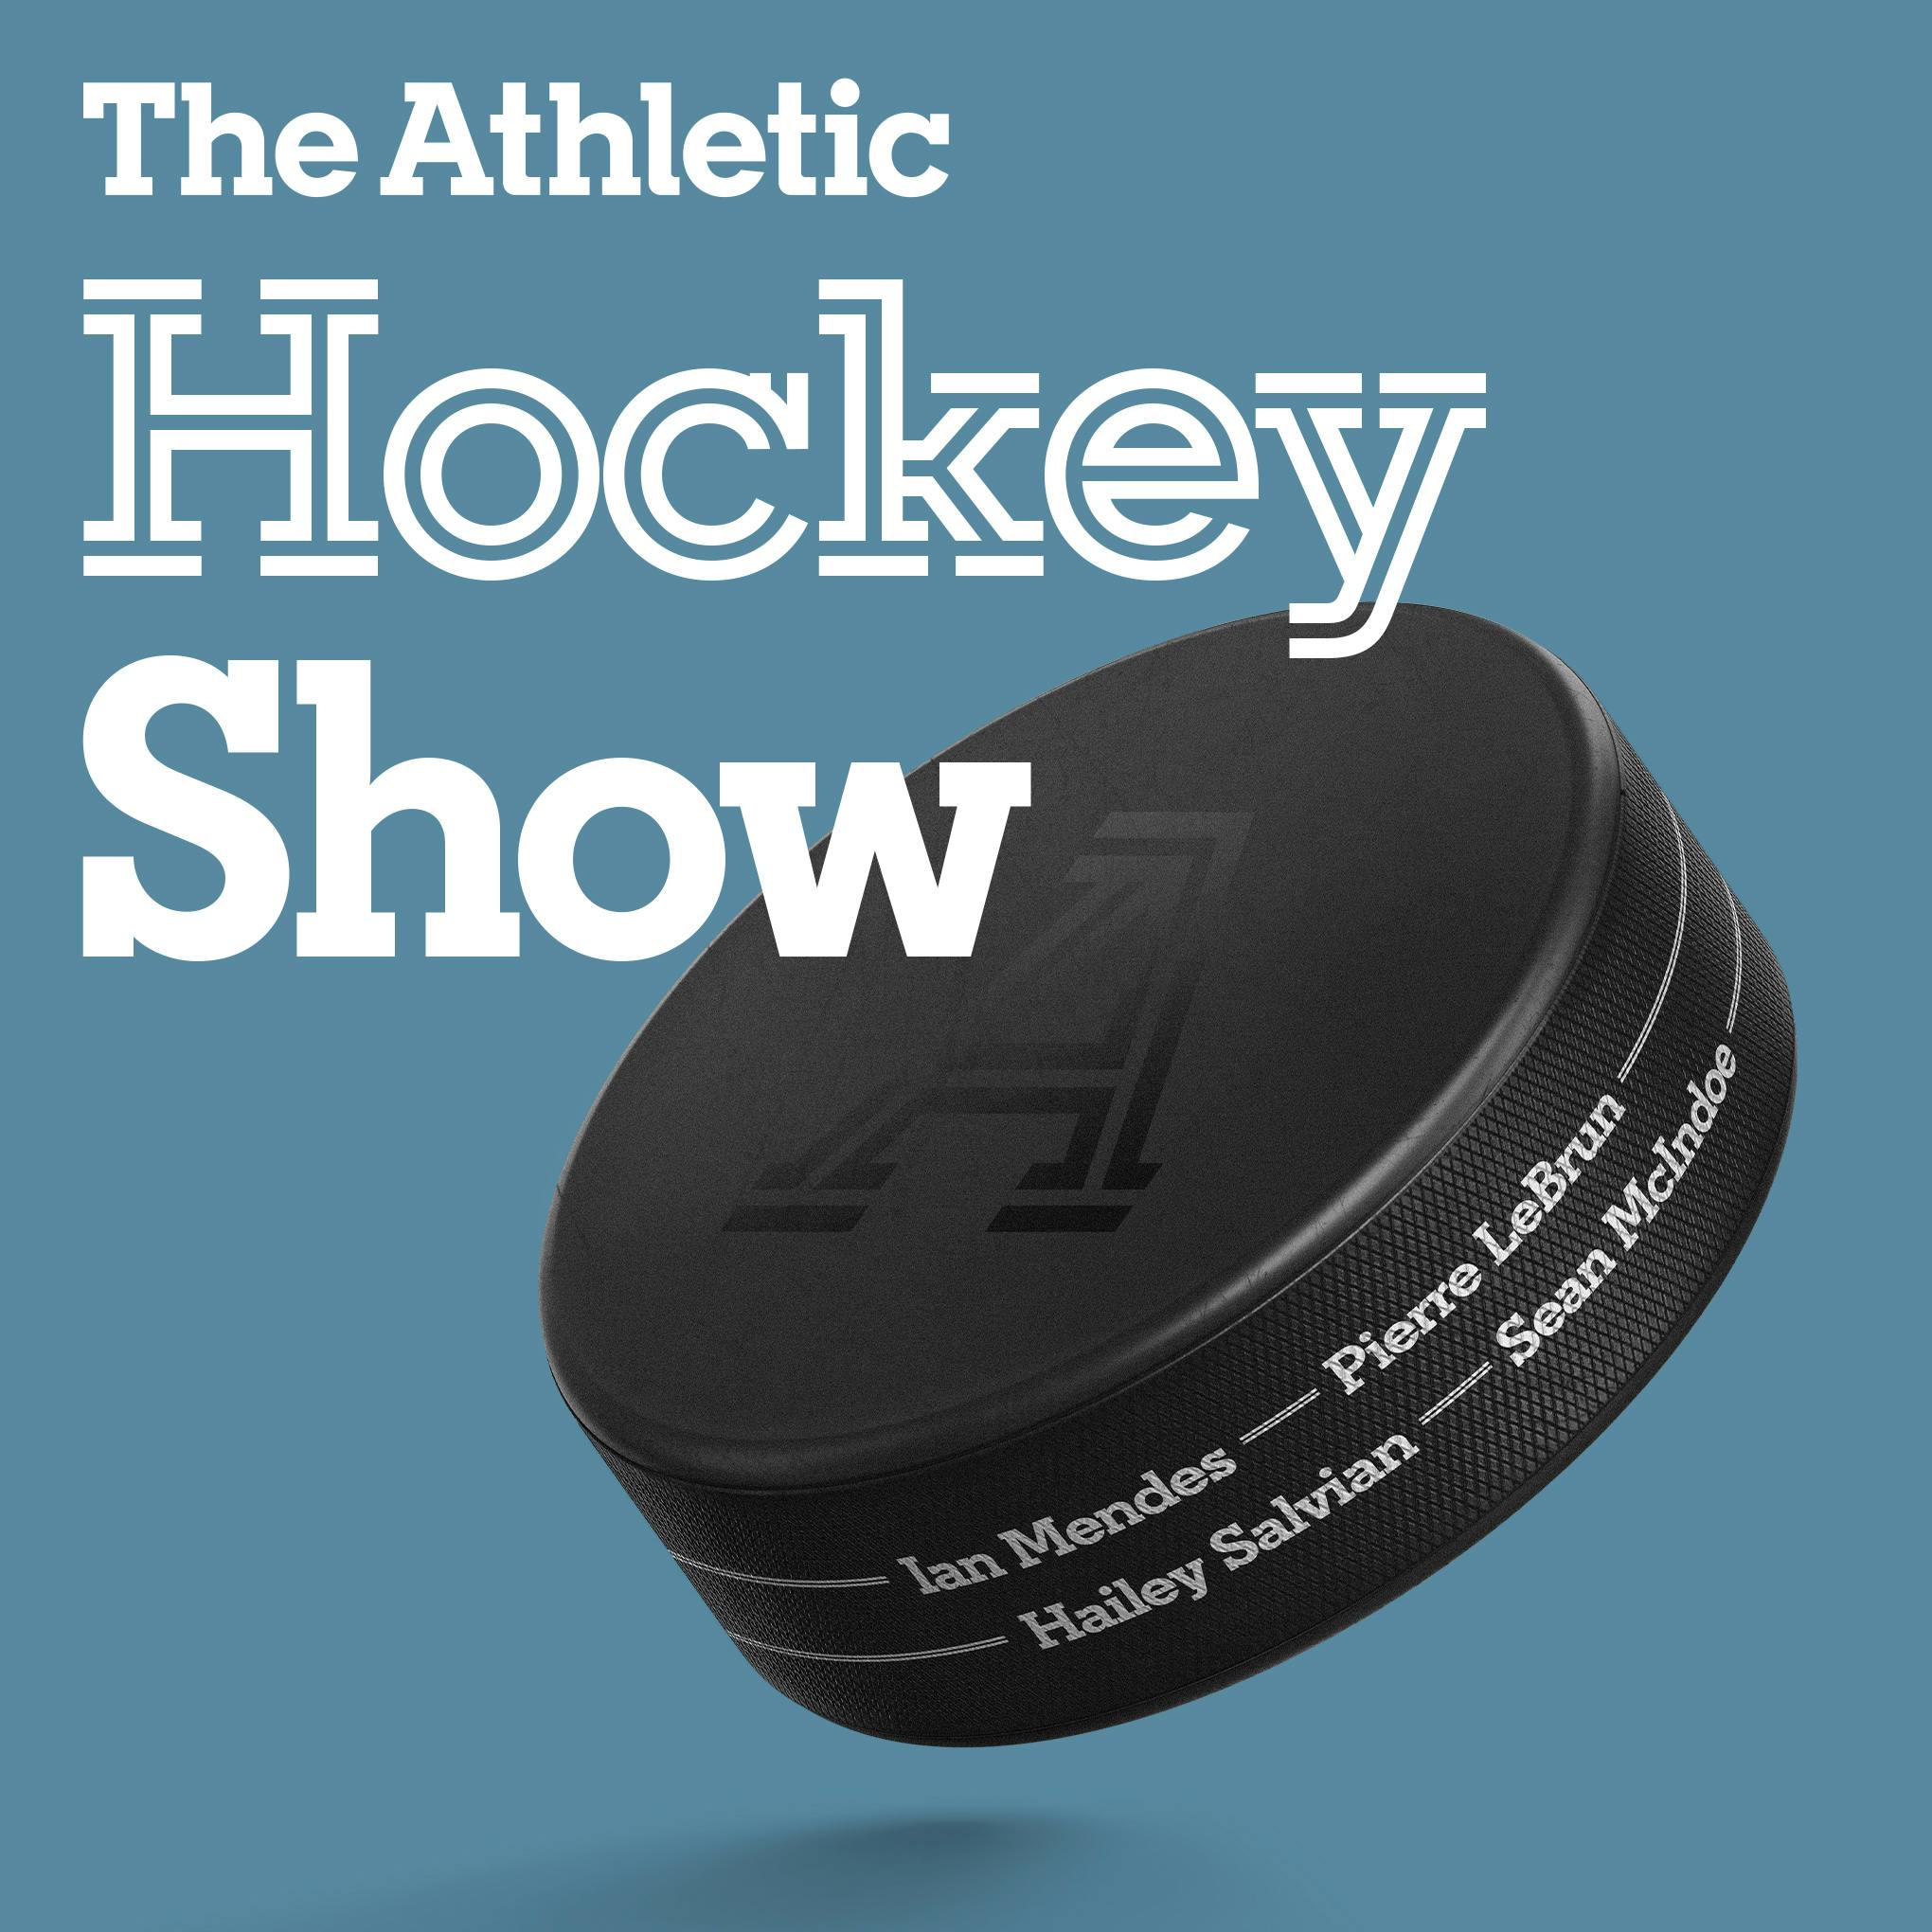 The Athletic Hockey Show podcast